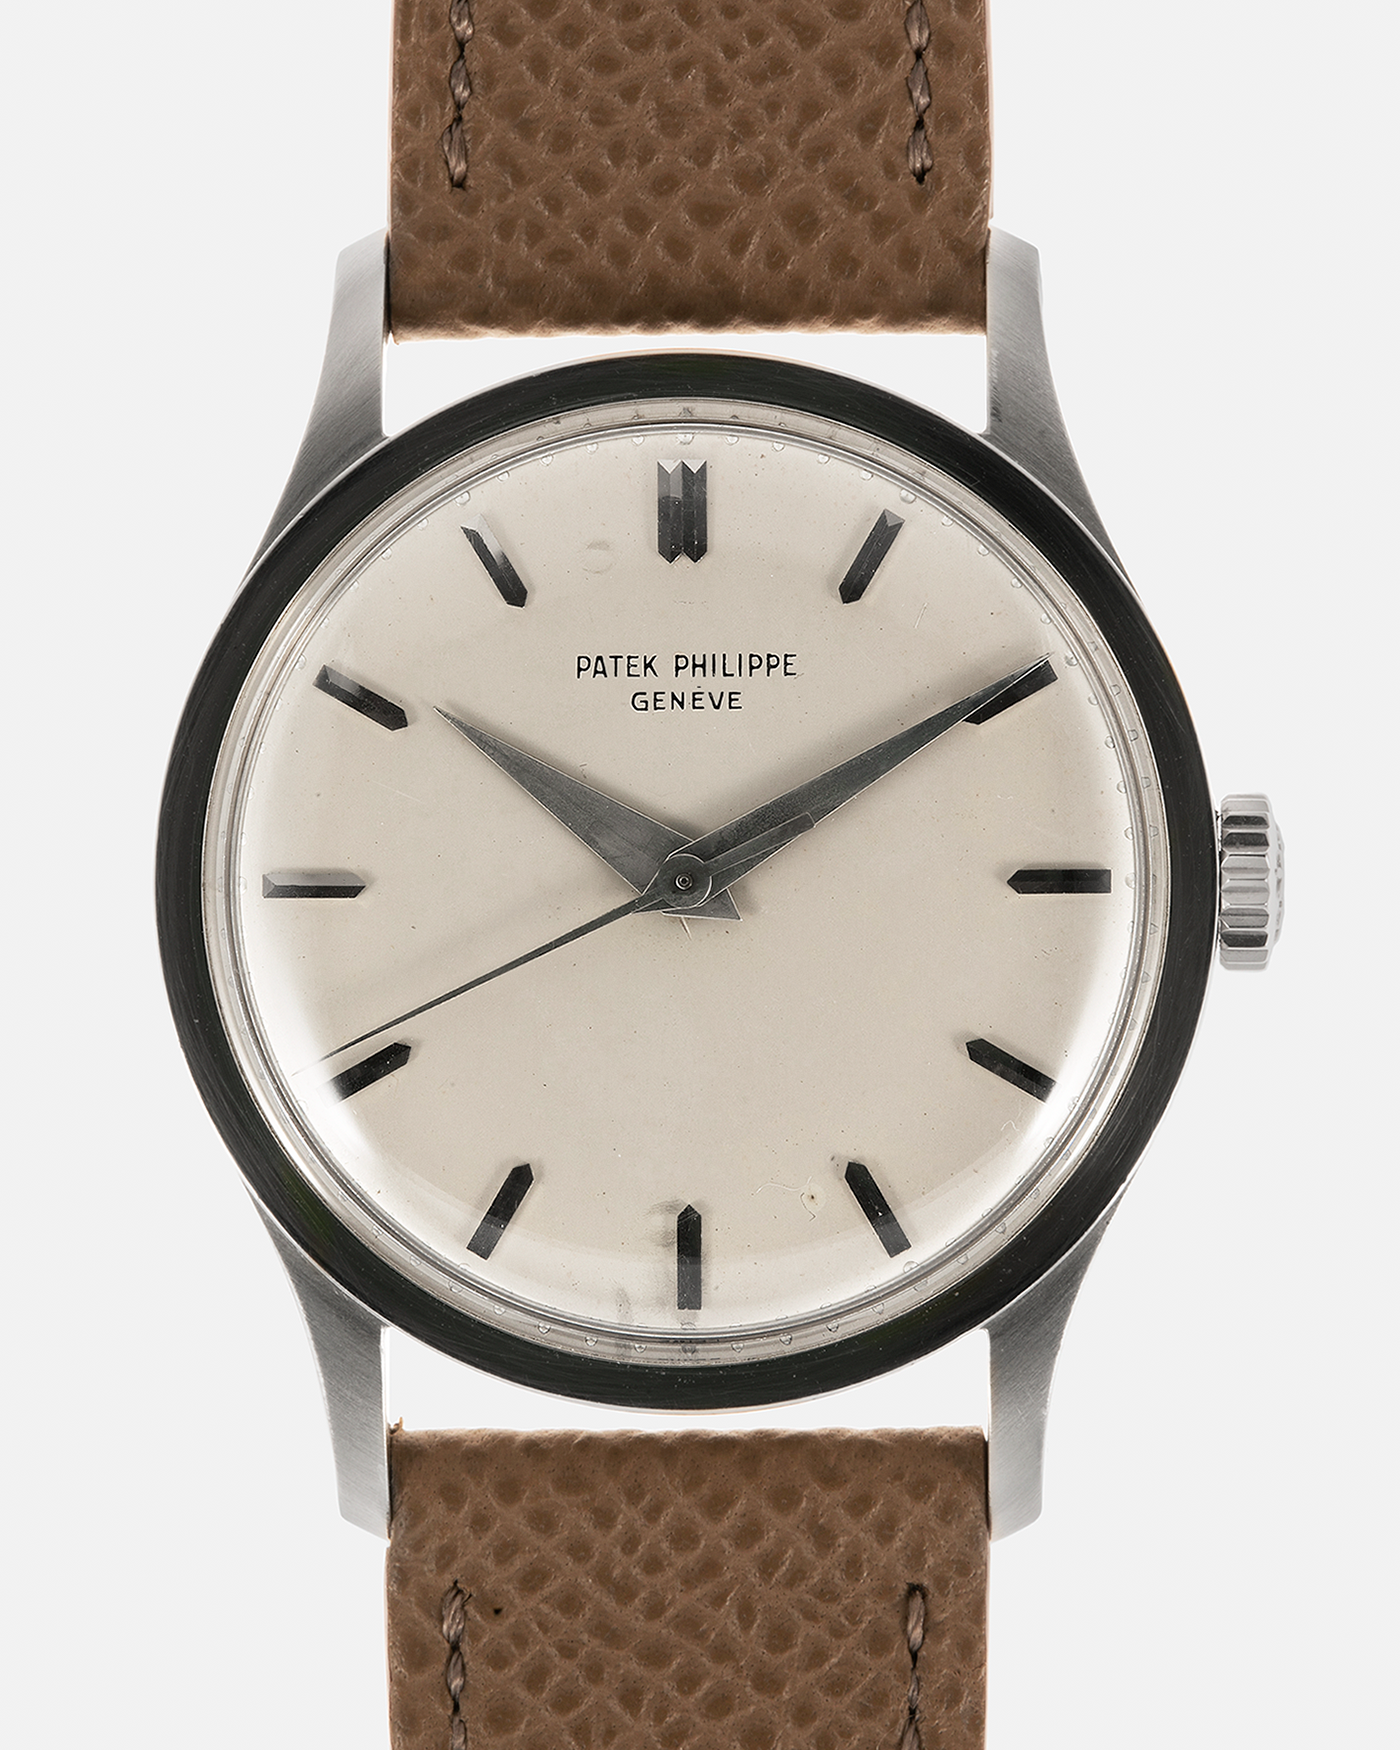 Brand: Patek Philippe Year: 1965 Model: Calatrava Reference: 570 Material: 18-carat White Gold Movement: Patek Philippe Cal. 27 SC, Manual-Winding Case Diameter: 35.5mm Lug Width: 20mm Strap: Nostime Taupe Grained Calf Leather Strap, additional Generic Black Alligator Leather Strap with Signed 18-carat White Gold Tang Buckle